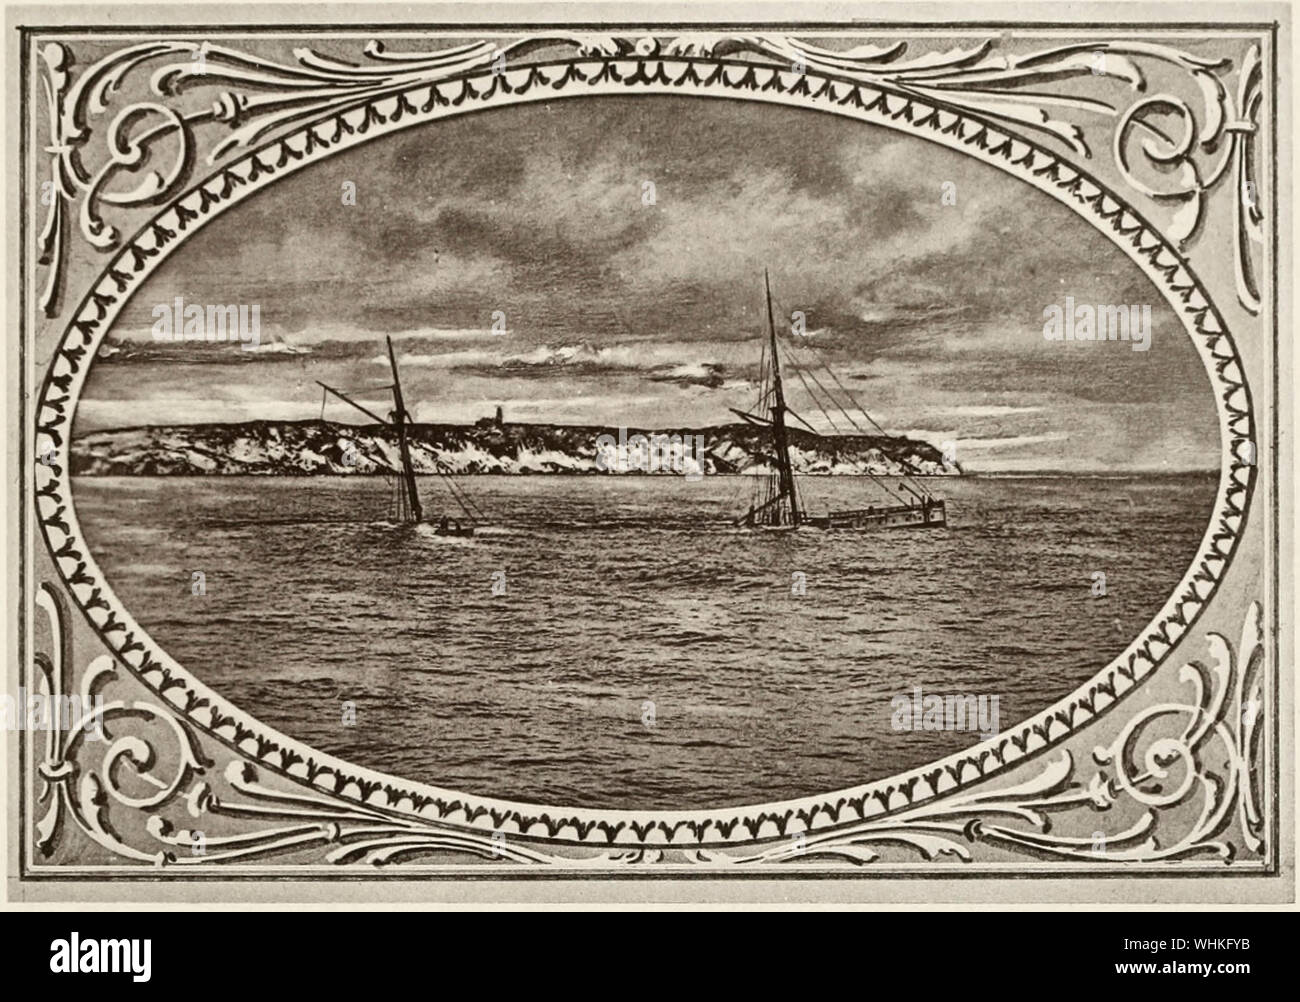 The City of Columbus after the Wreck. The passenger steamer City of Columbus ran aground on Devil’s Bridge off the Gay Head Cliffs in Aquinnah, Massachusetts, in the early hours of January 18, 1884. Stock Photo